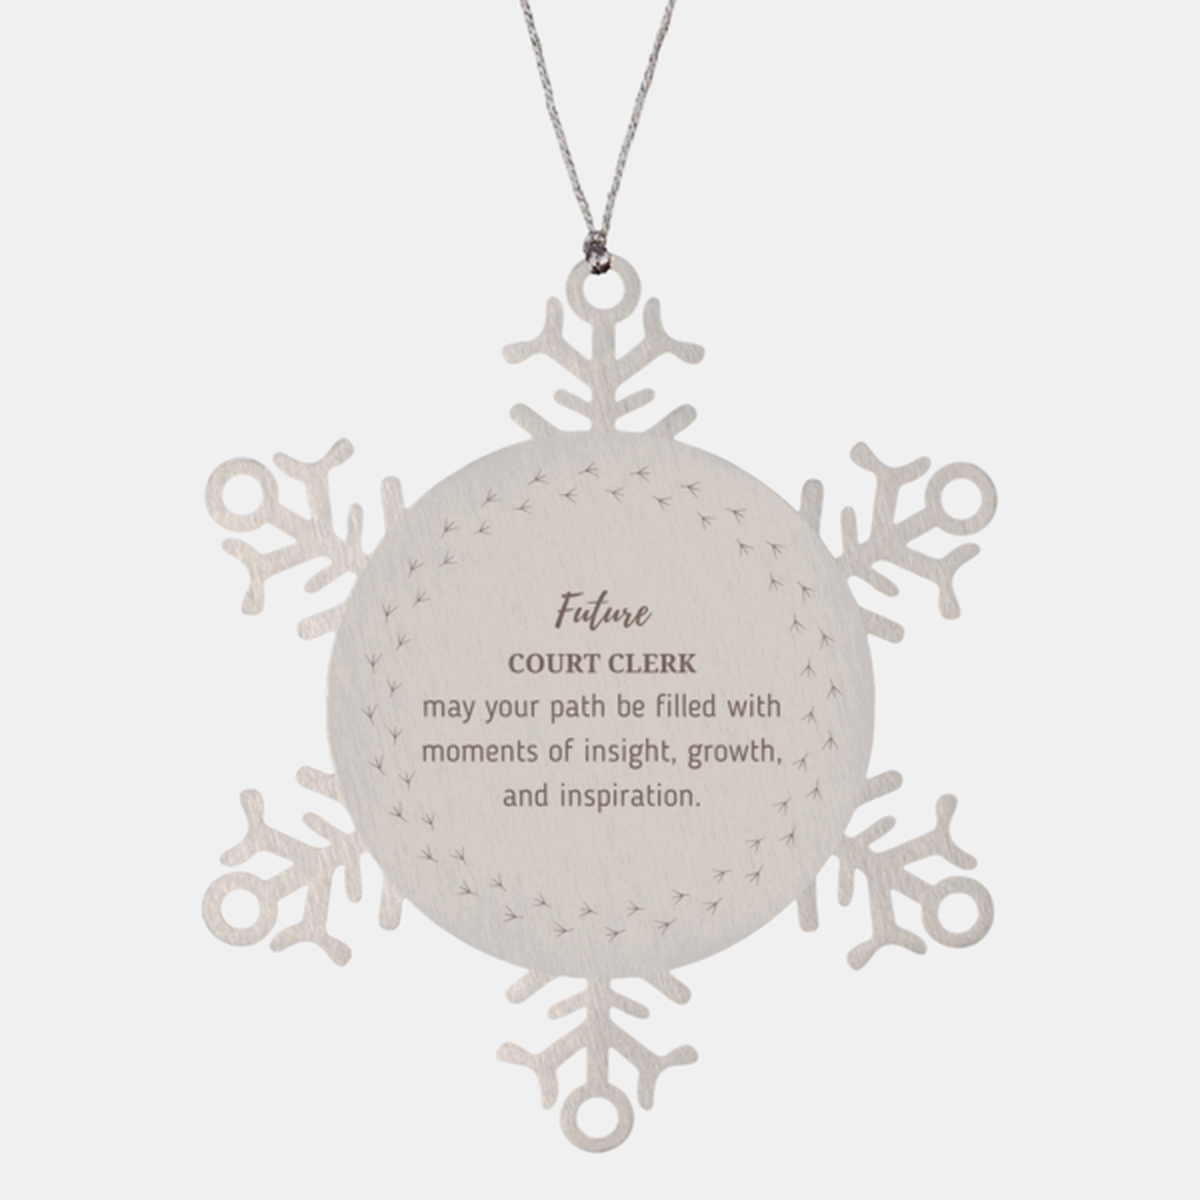 Future Court Clerk Gifts, May your path be filled with moments of insight, Graduation Gifts for New Court Clerk, Christmas Unique Snowflake Ornament For Men, Women, Friends